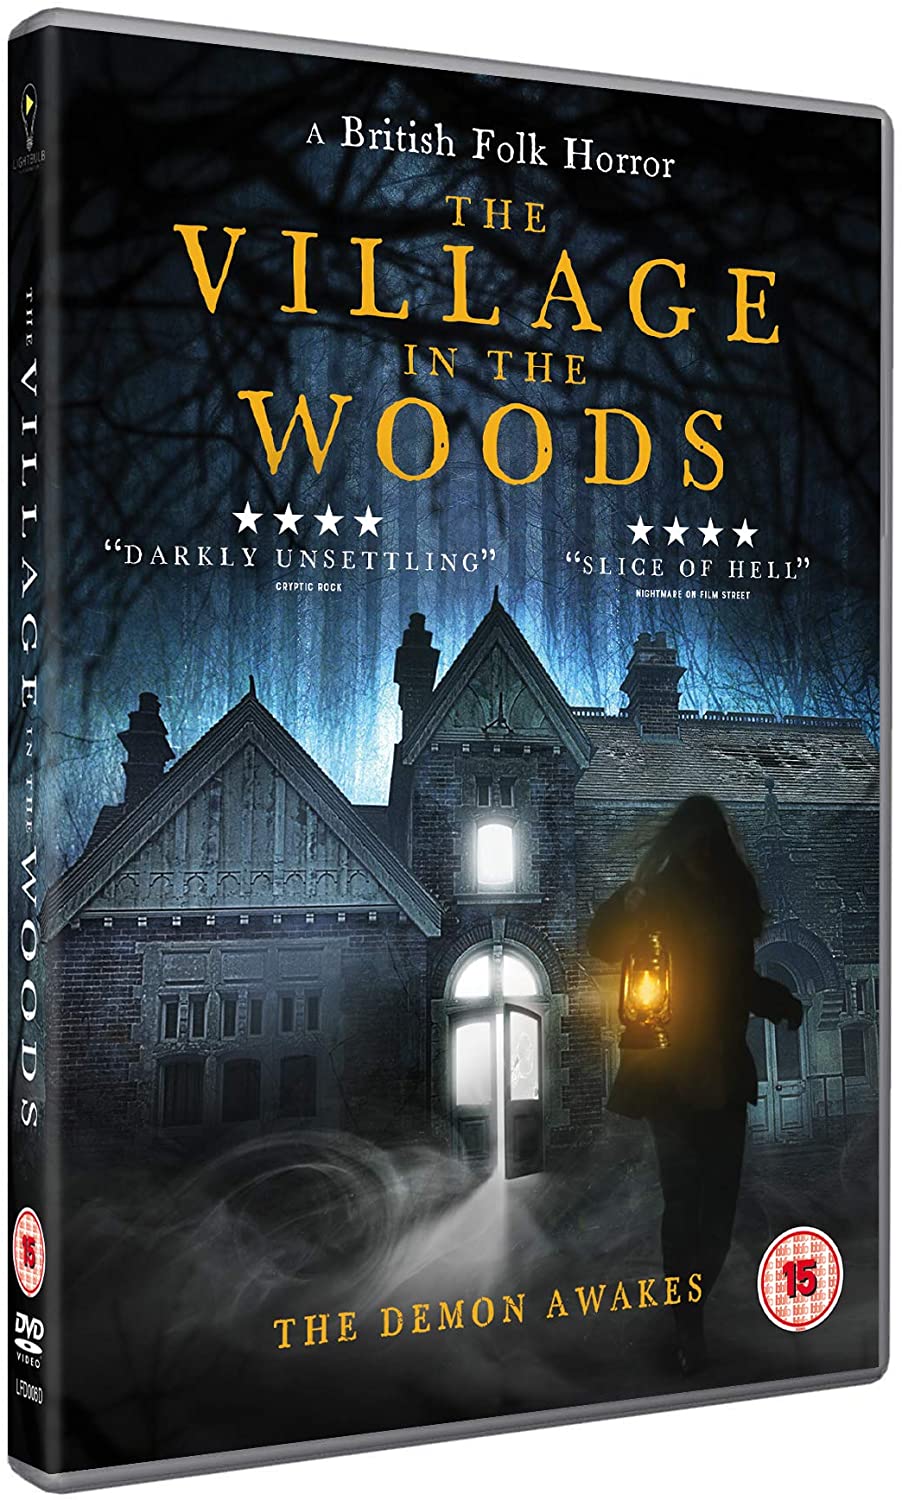 The Village in the Woods - Horror [DVD]